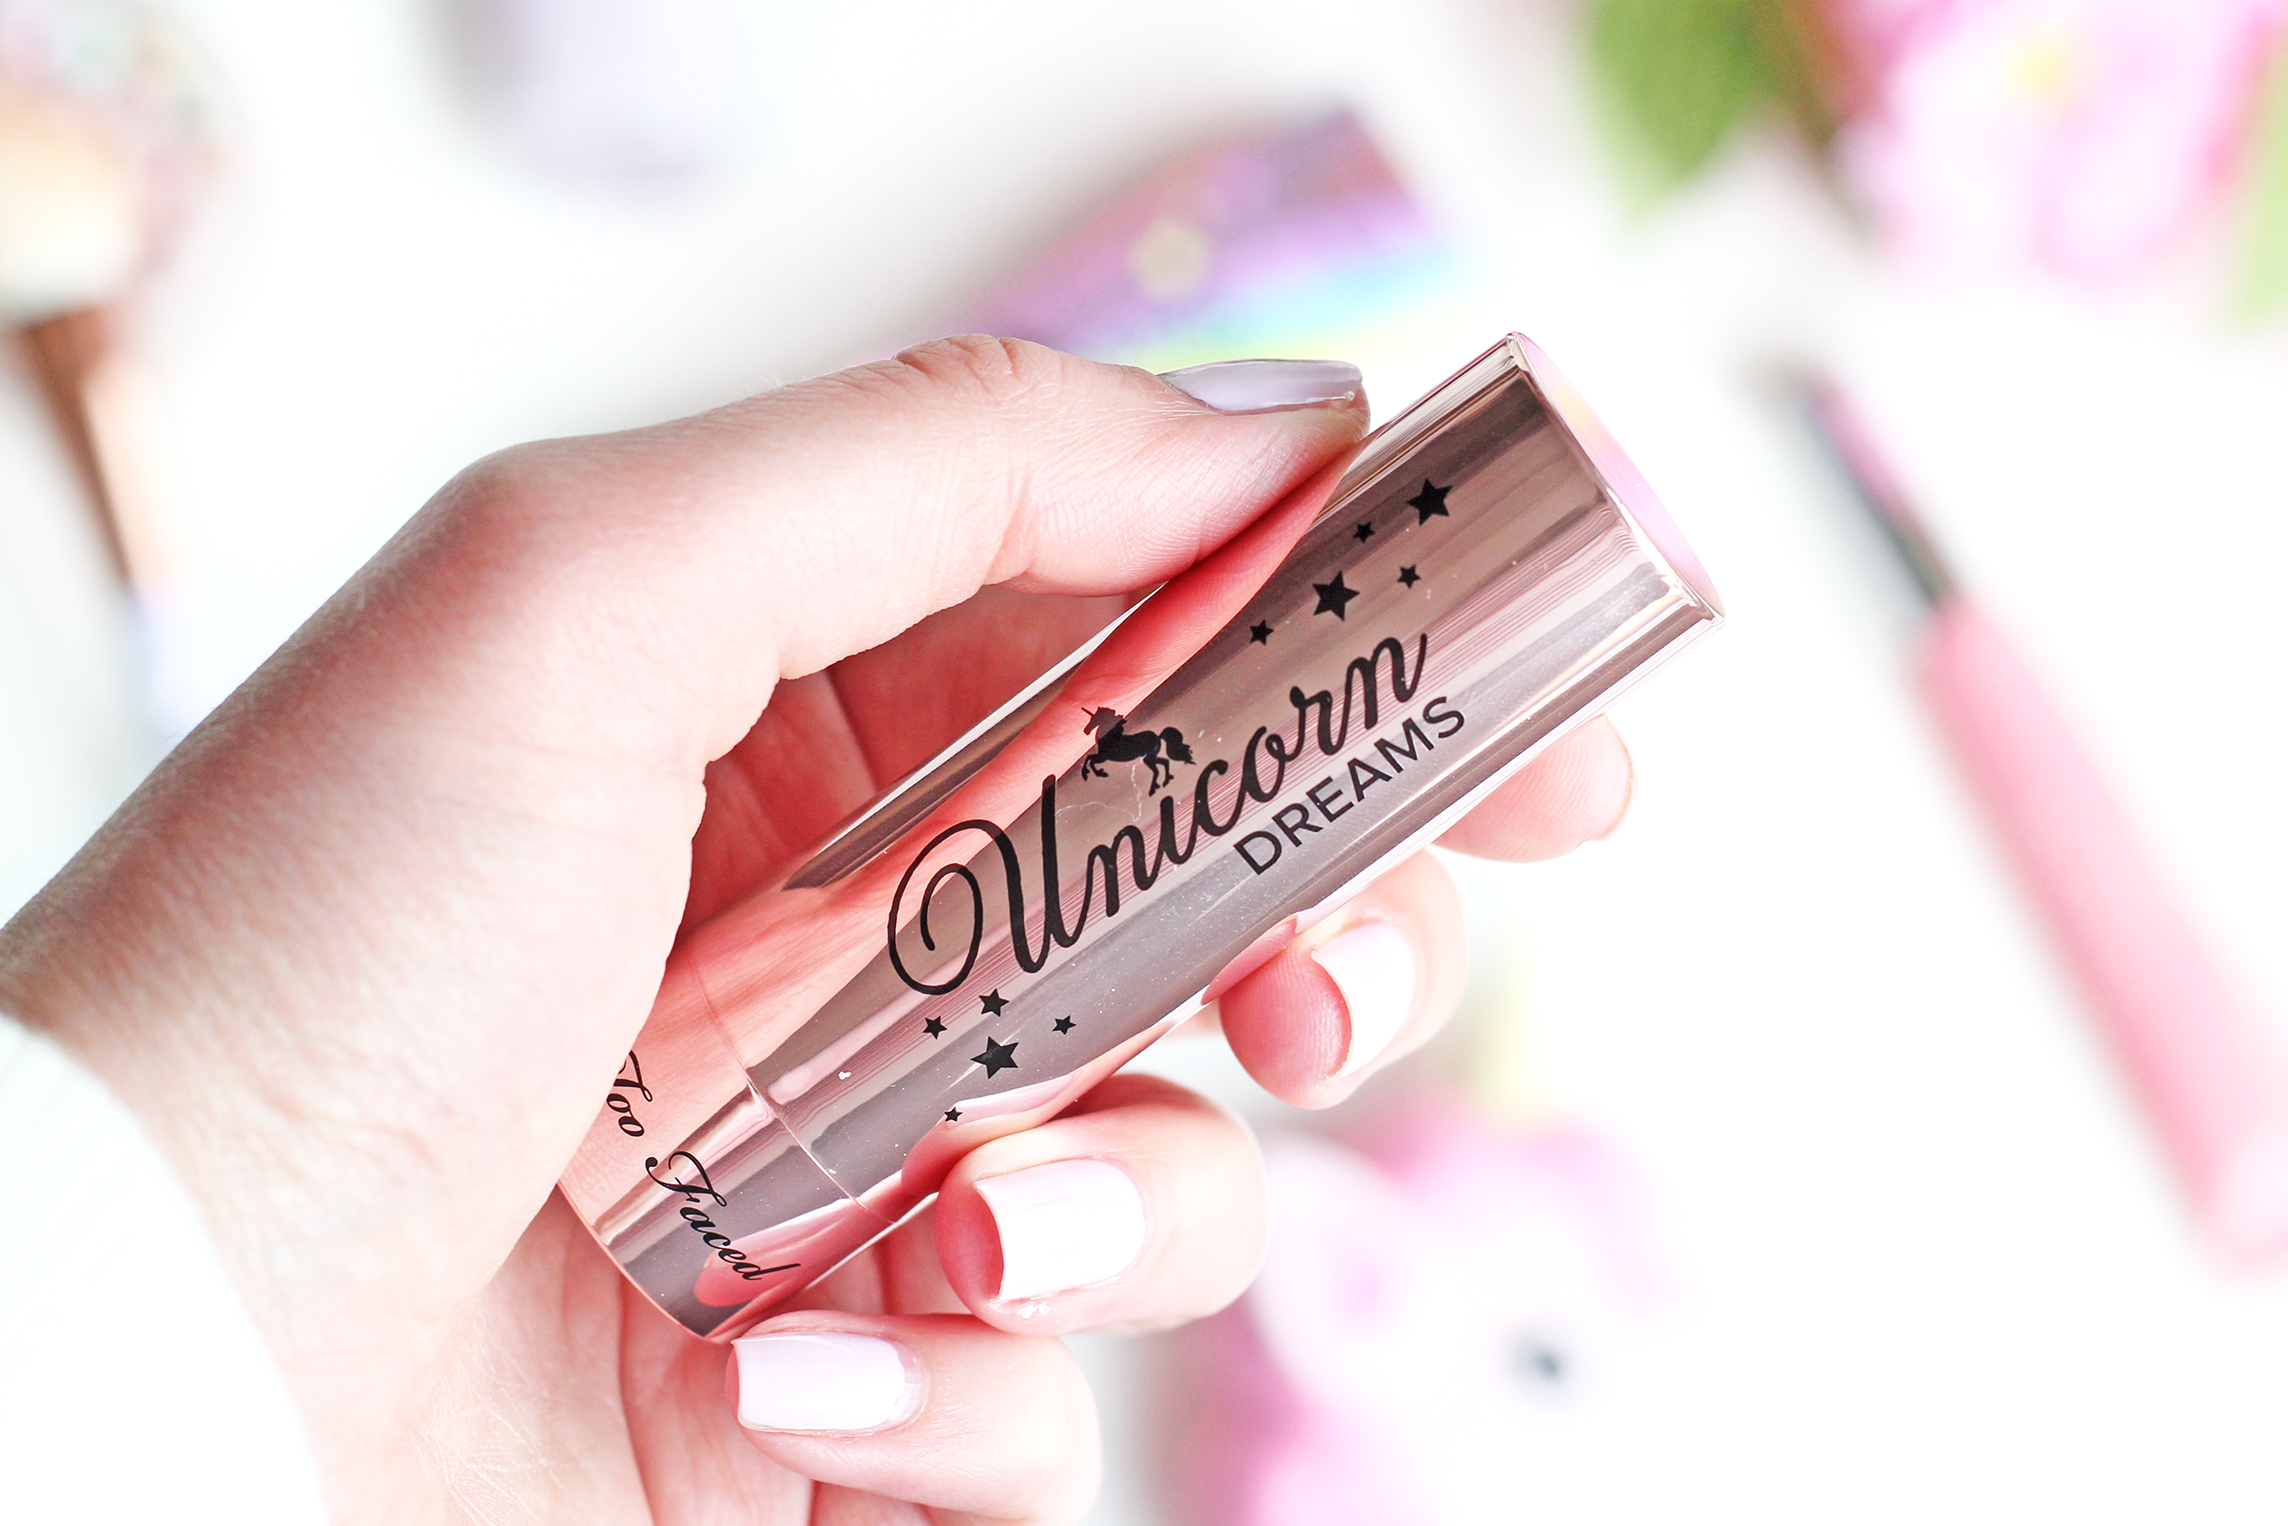 life's a festival too faced highlighter review a beauty day